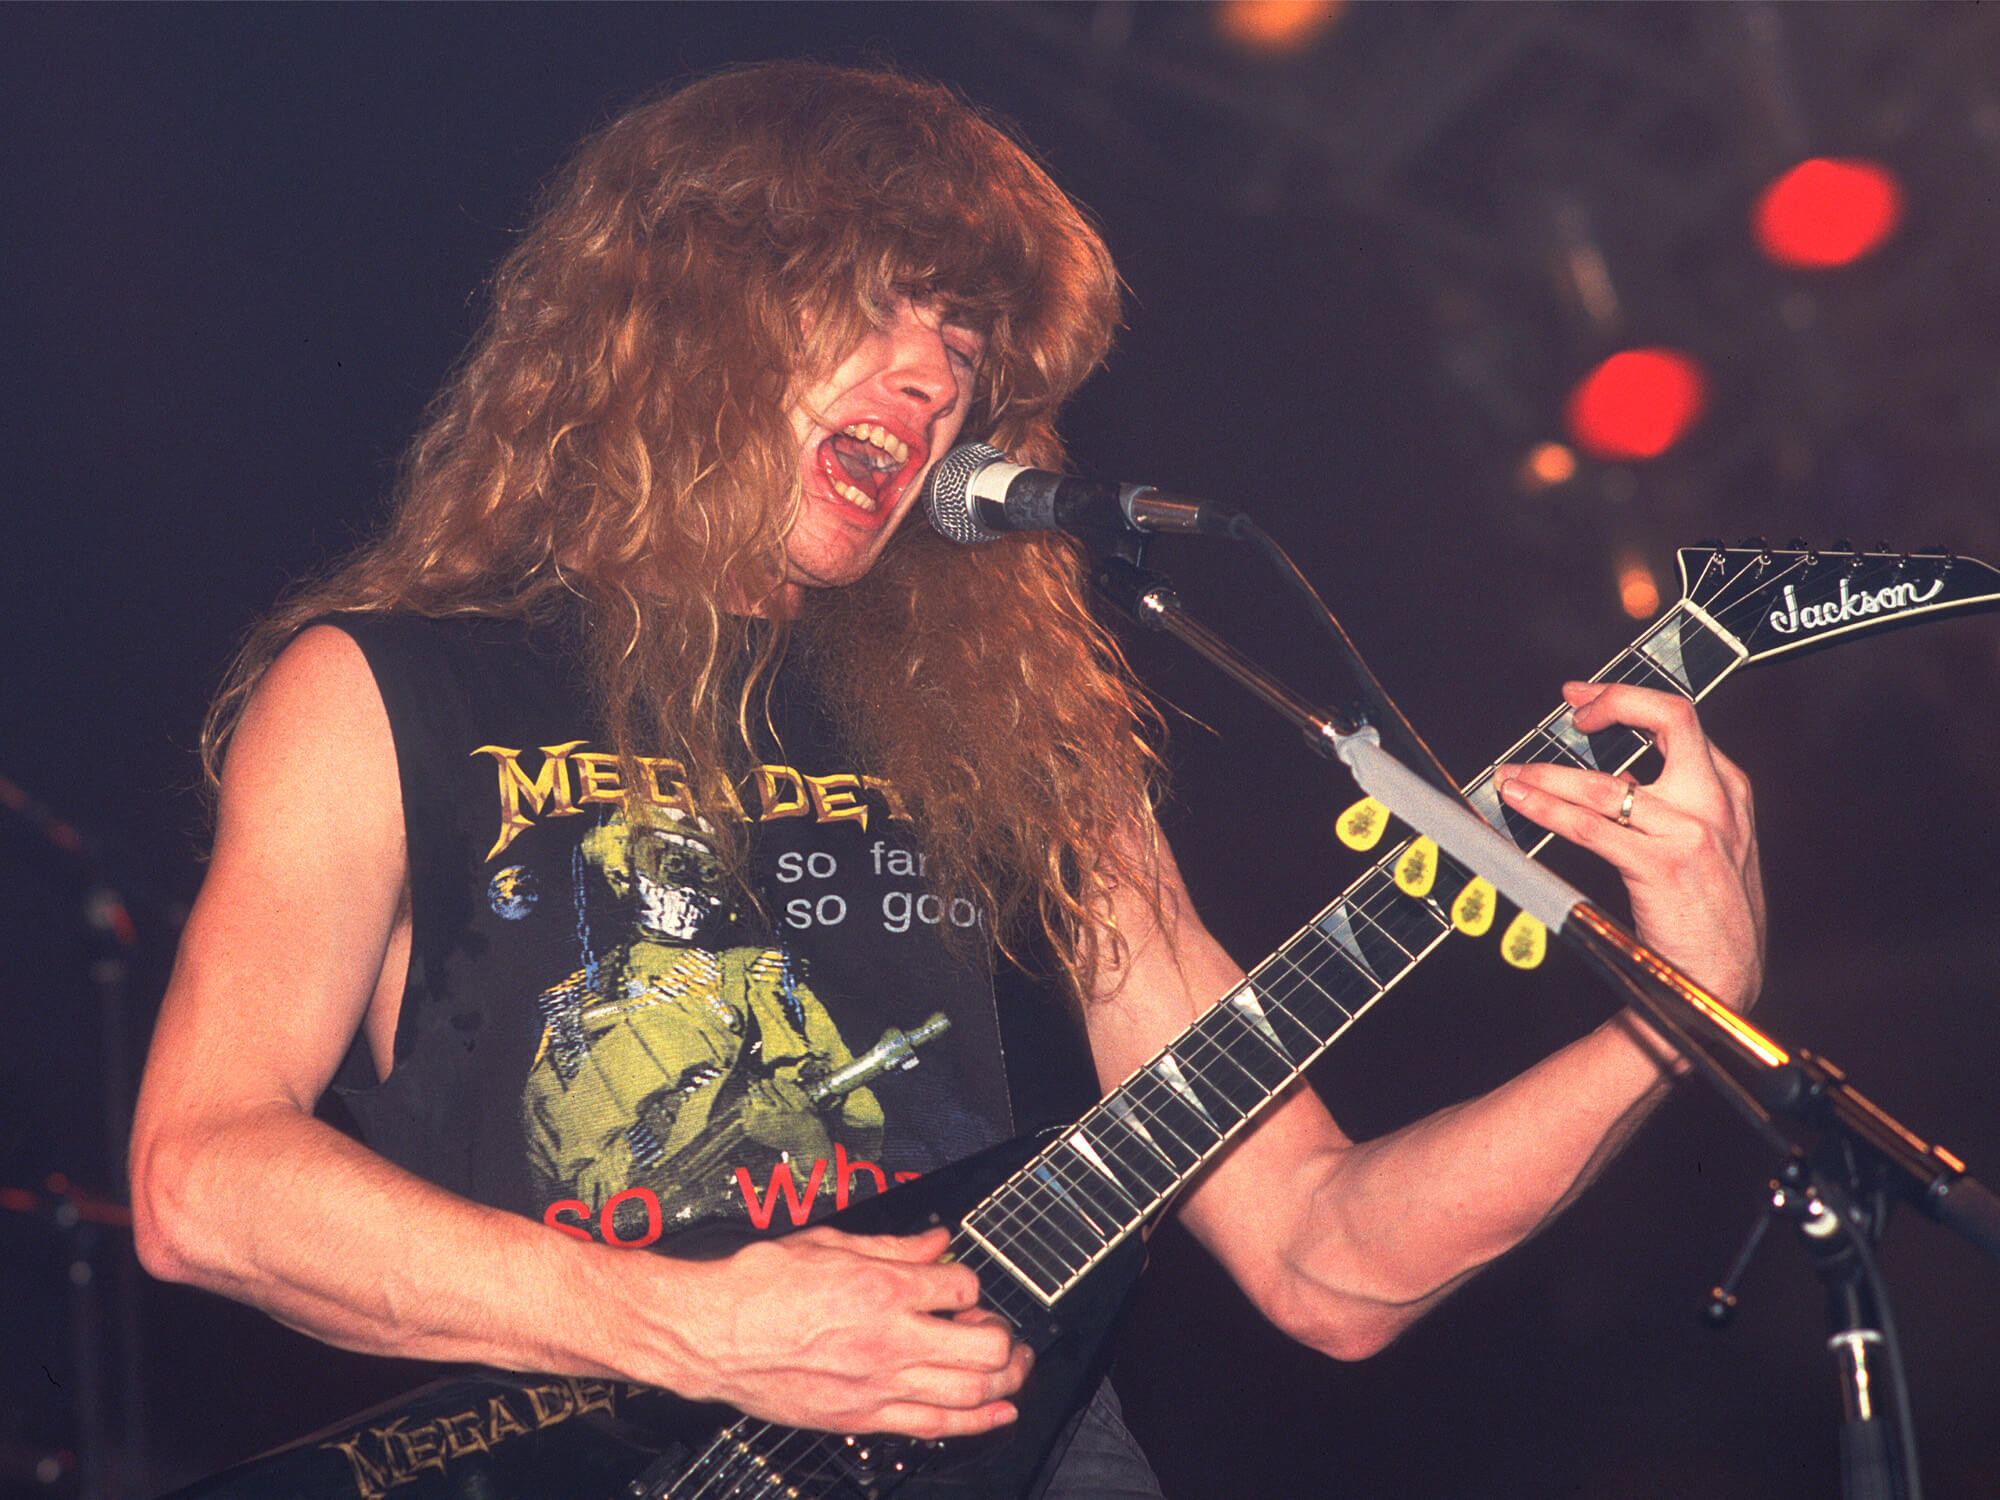 Dave Mustaine in 1988, he's singing into a mic and playing a Jackson electric guitar